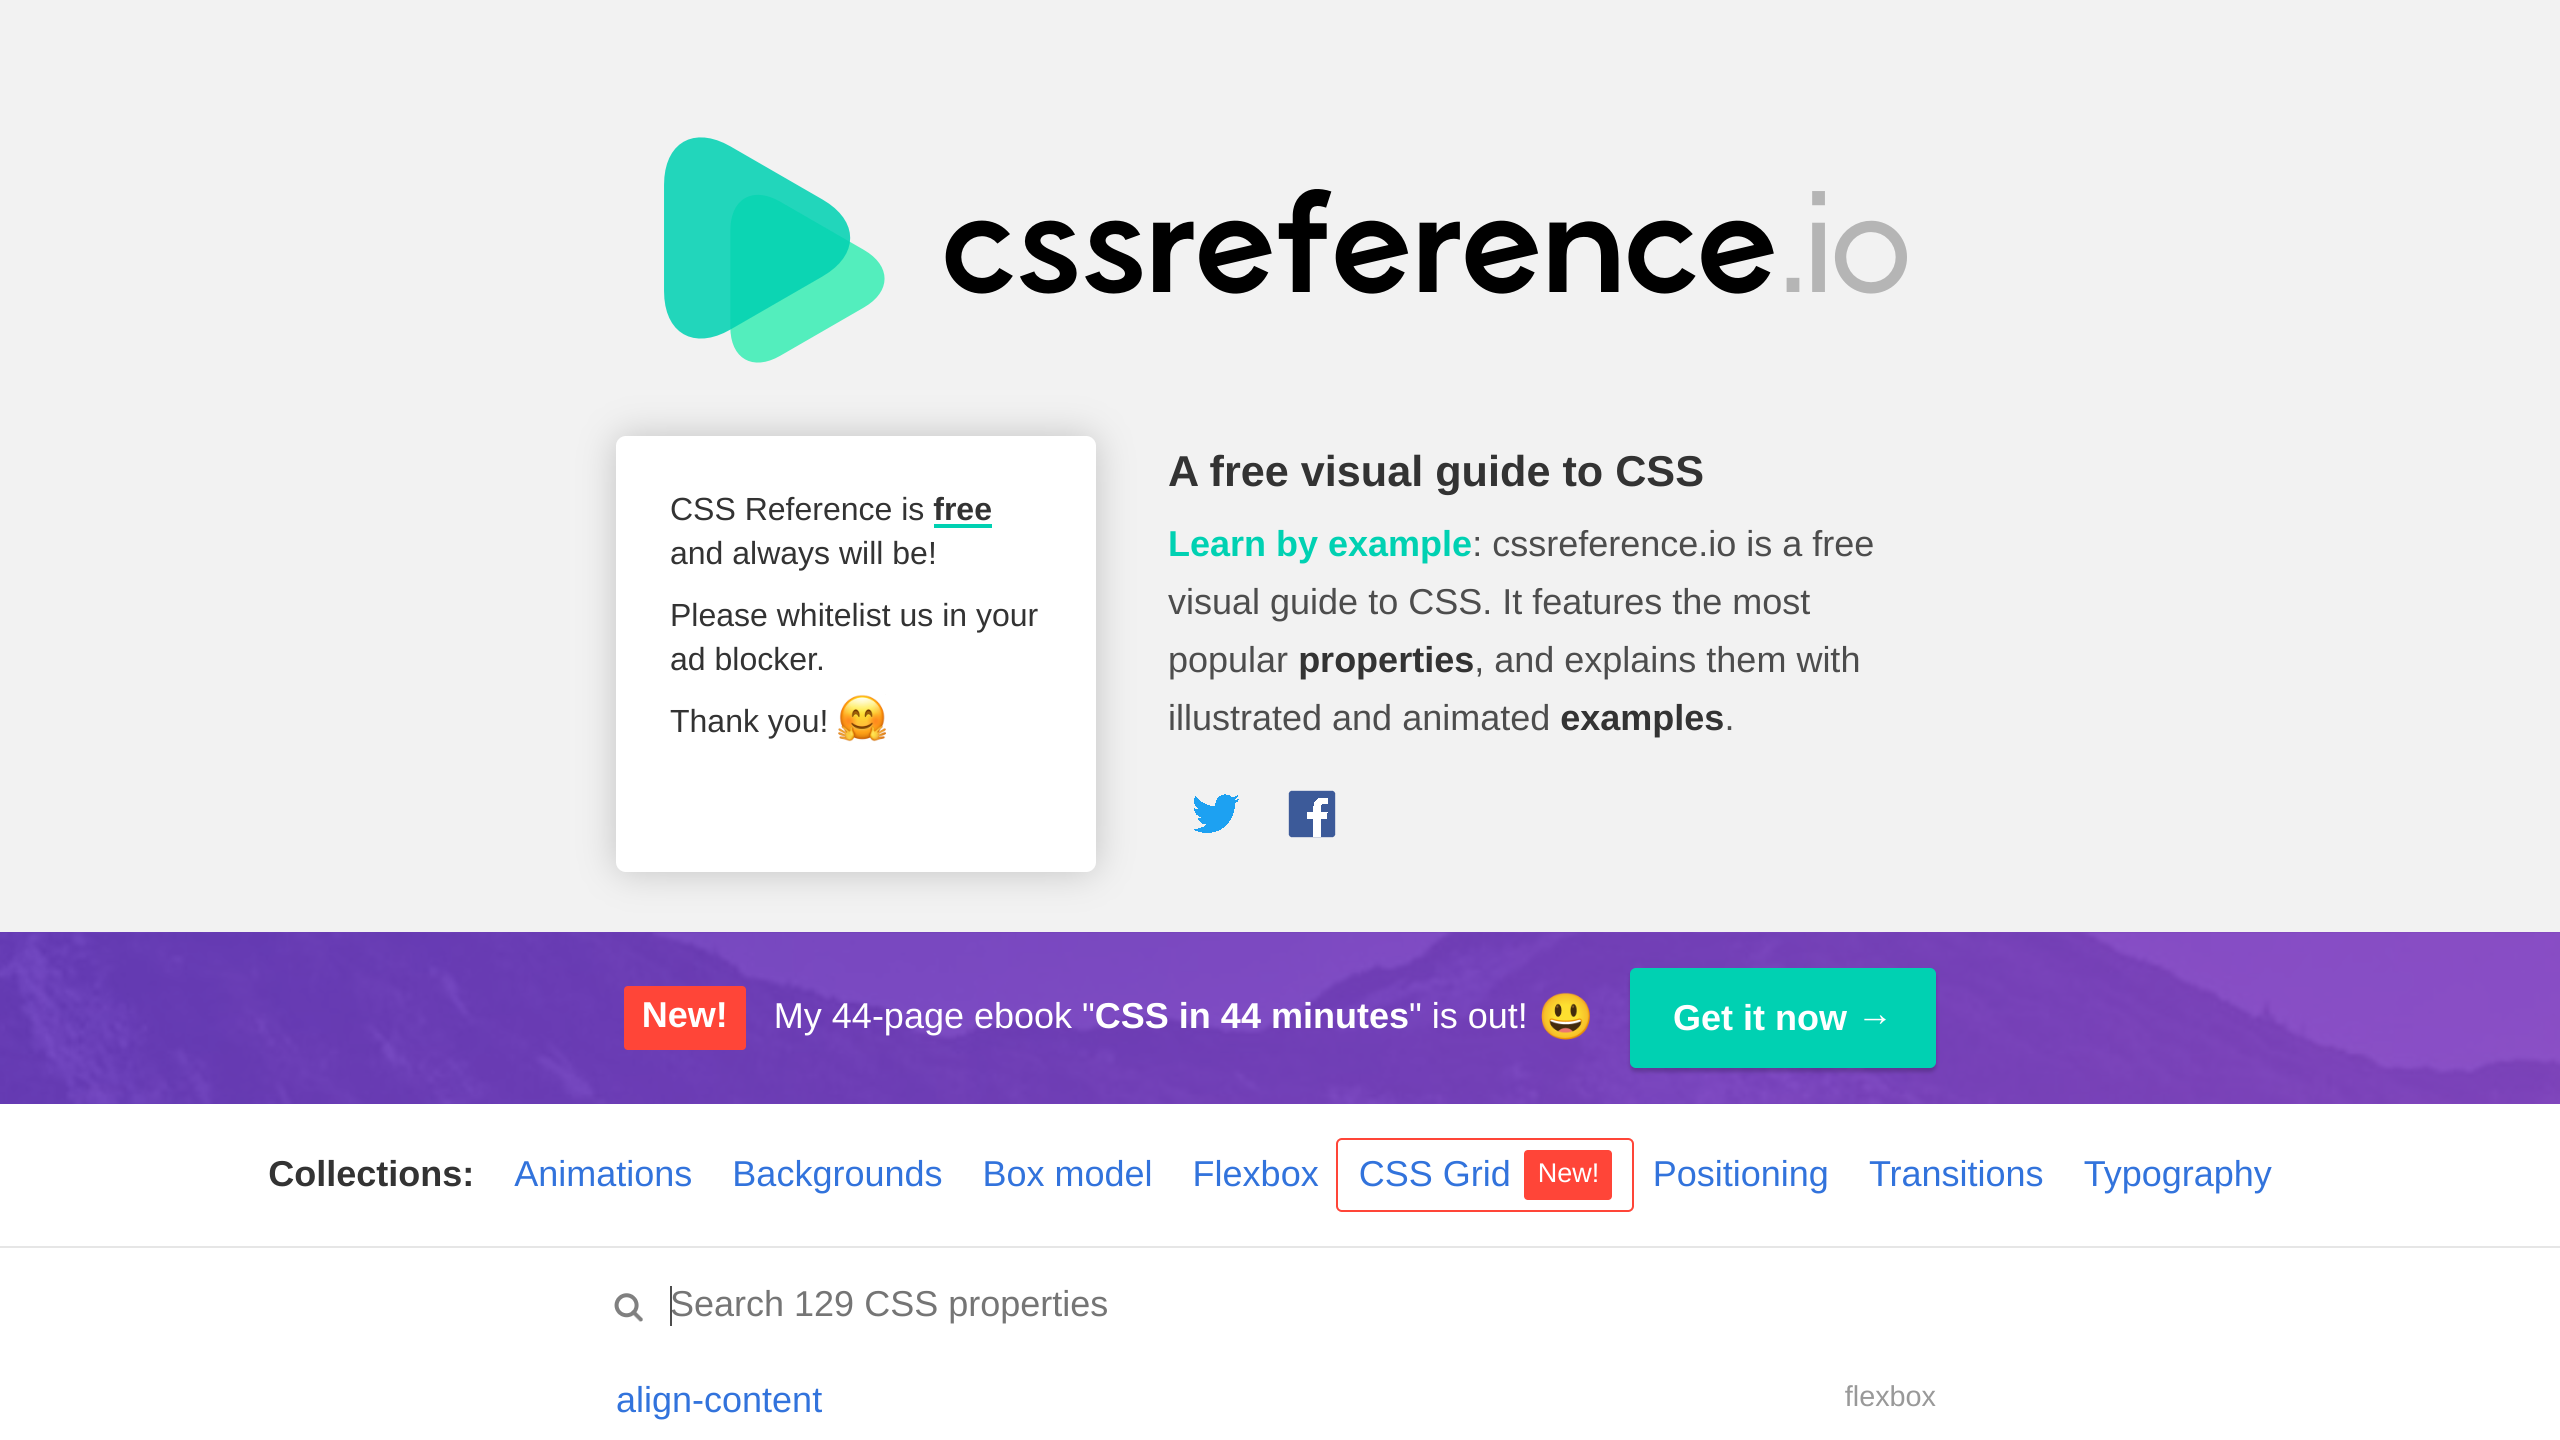 CSS Reference's website screenshot